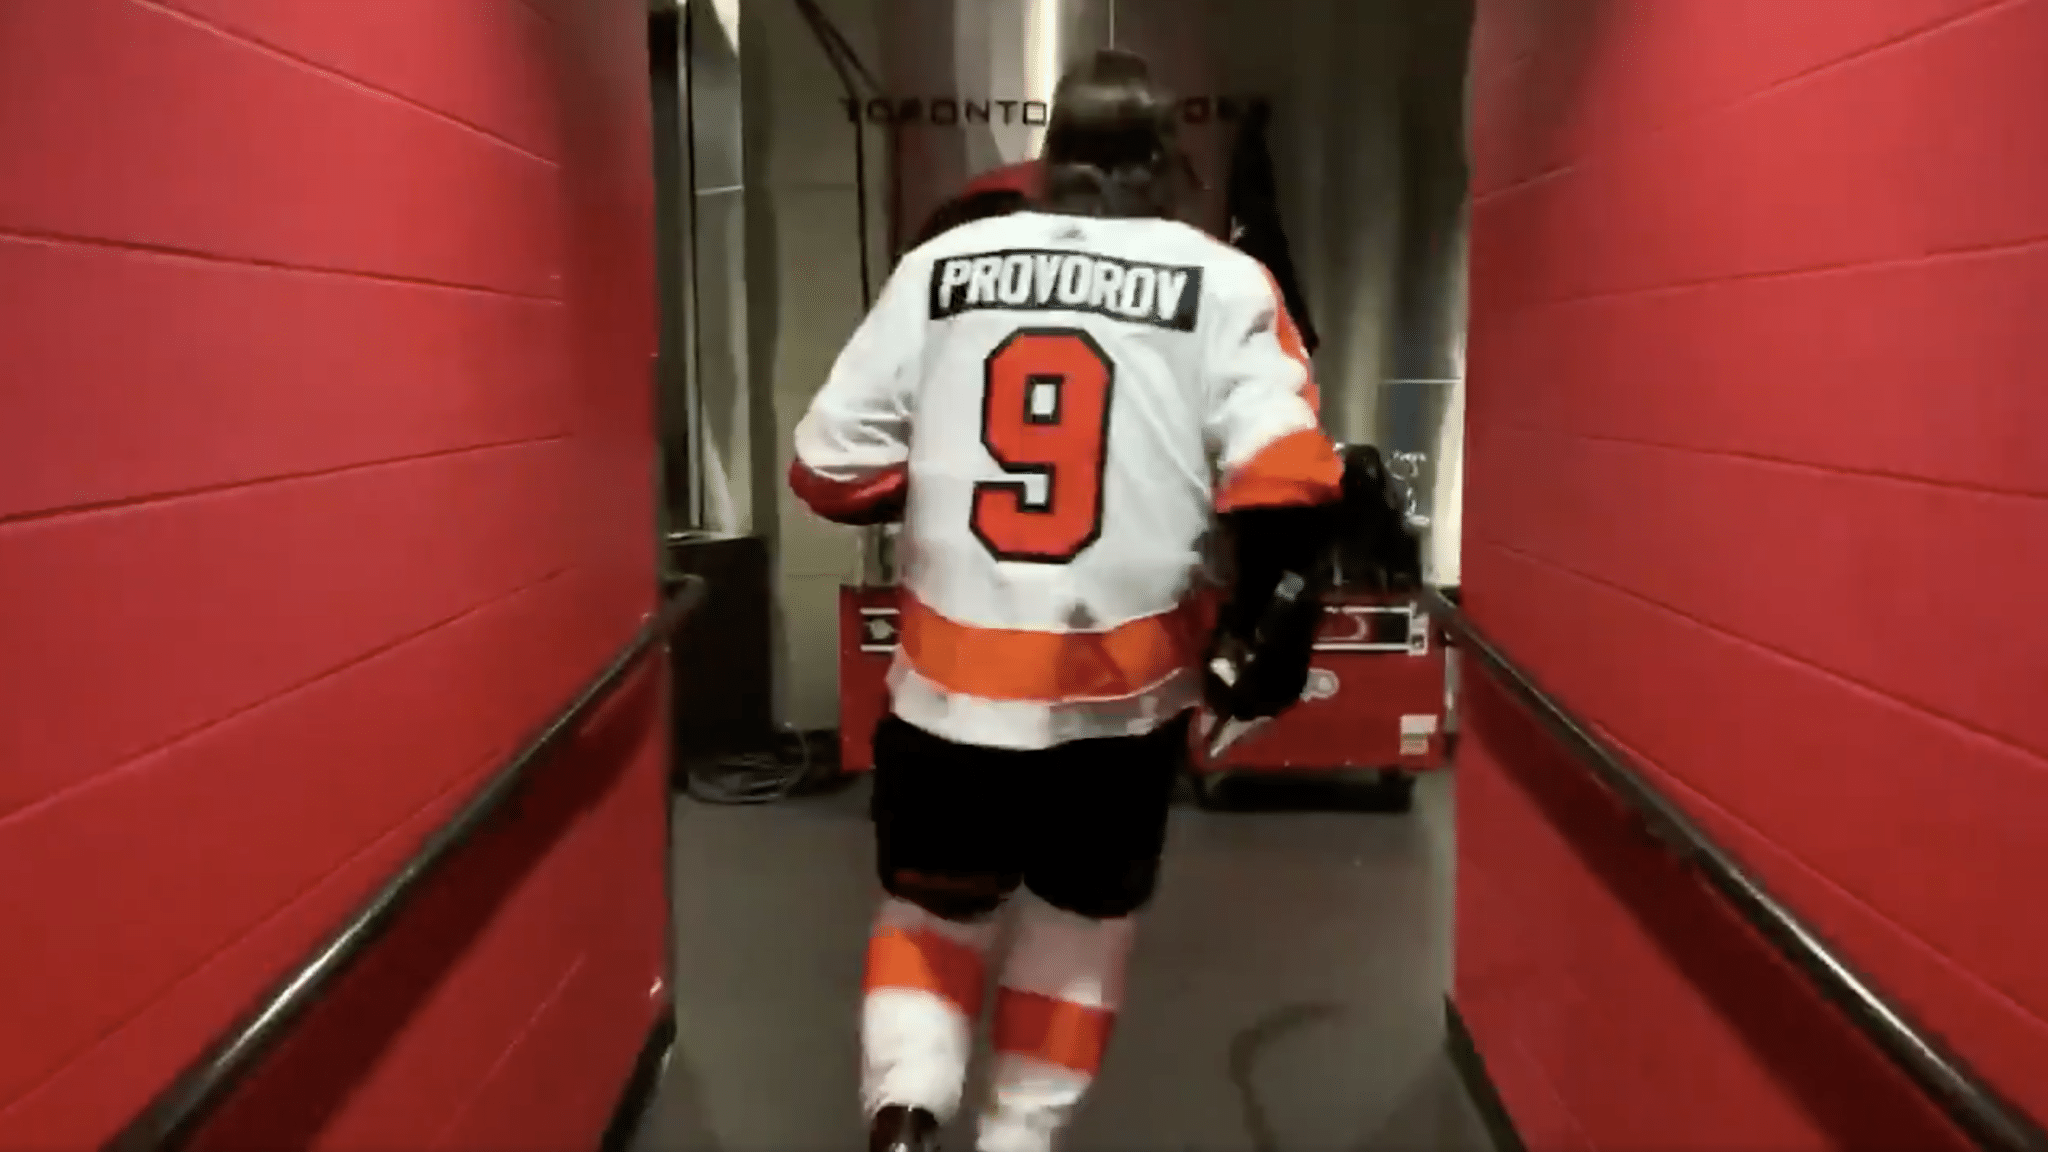 Ivan Provorov’s Giddiness After Game 6 Will Warm the Cockles of Your Heart